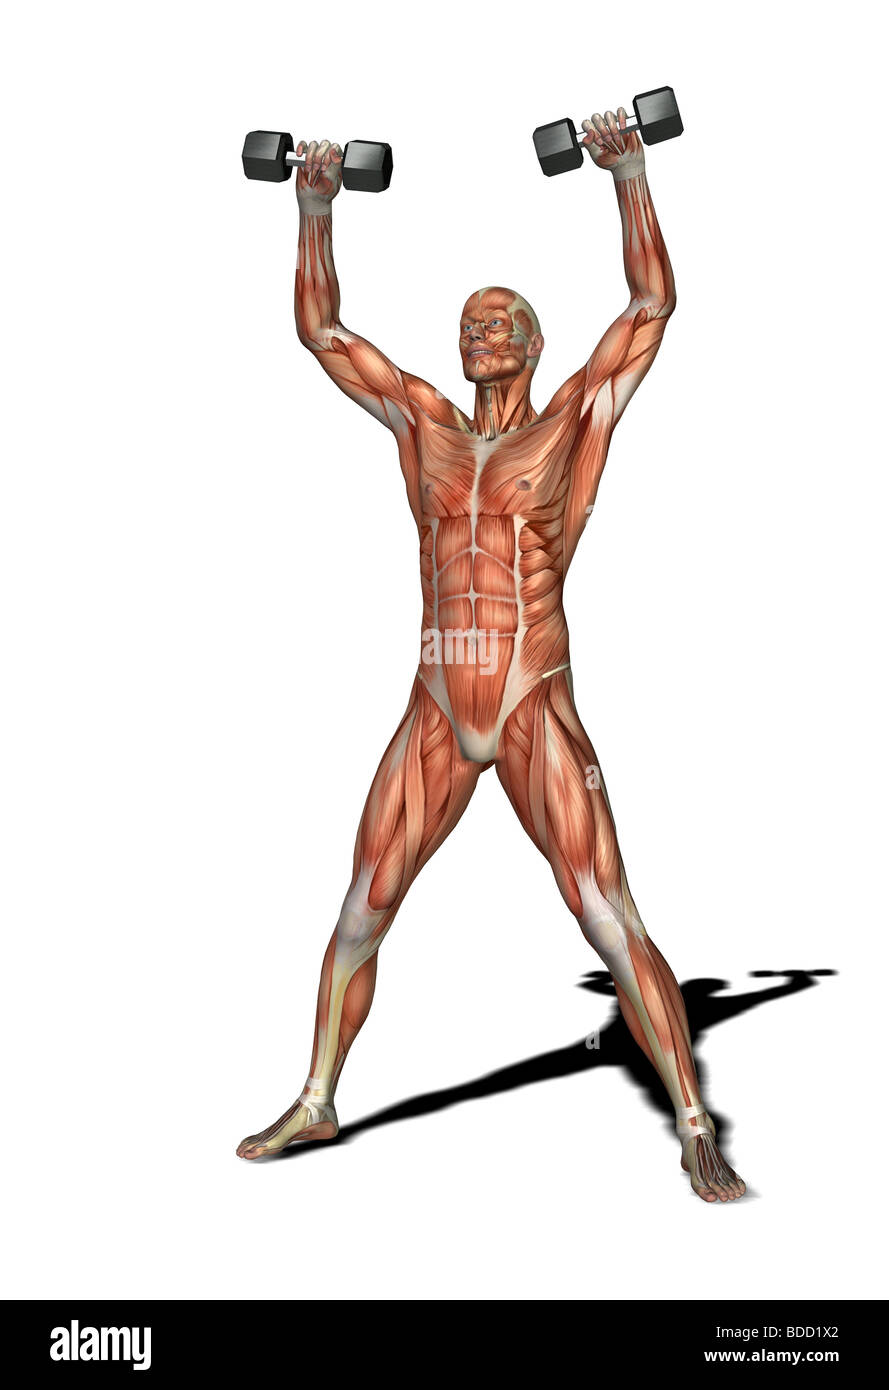 muscle man with barbell Stock Photo